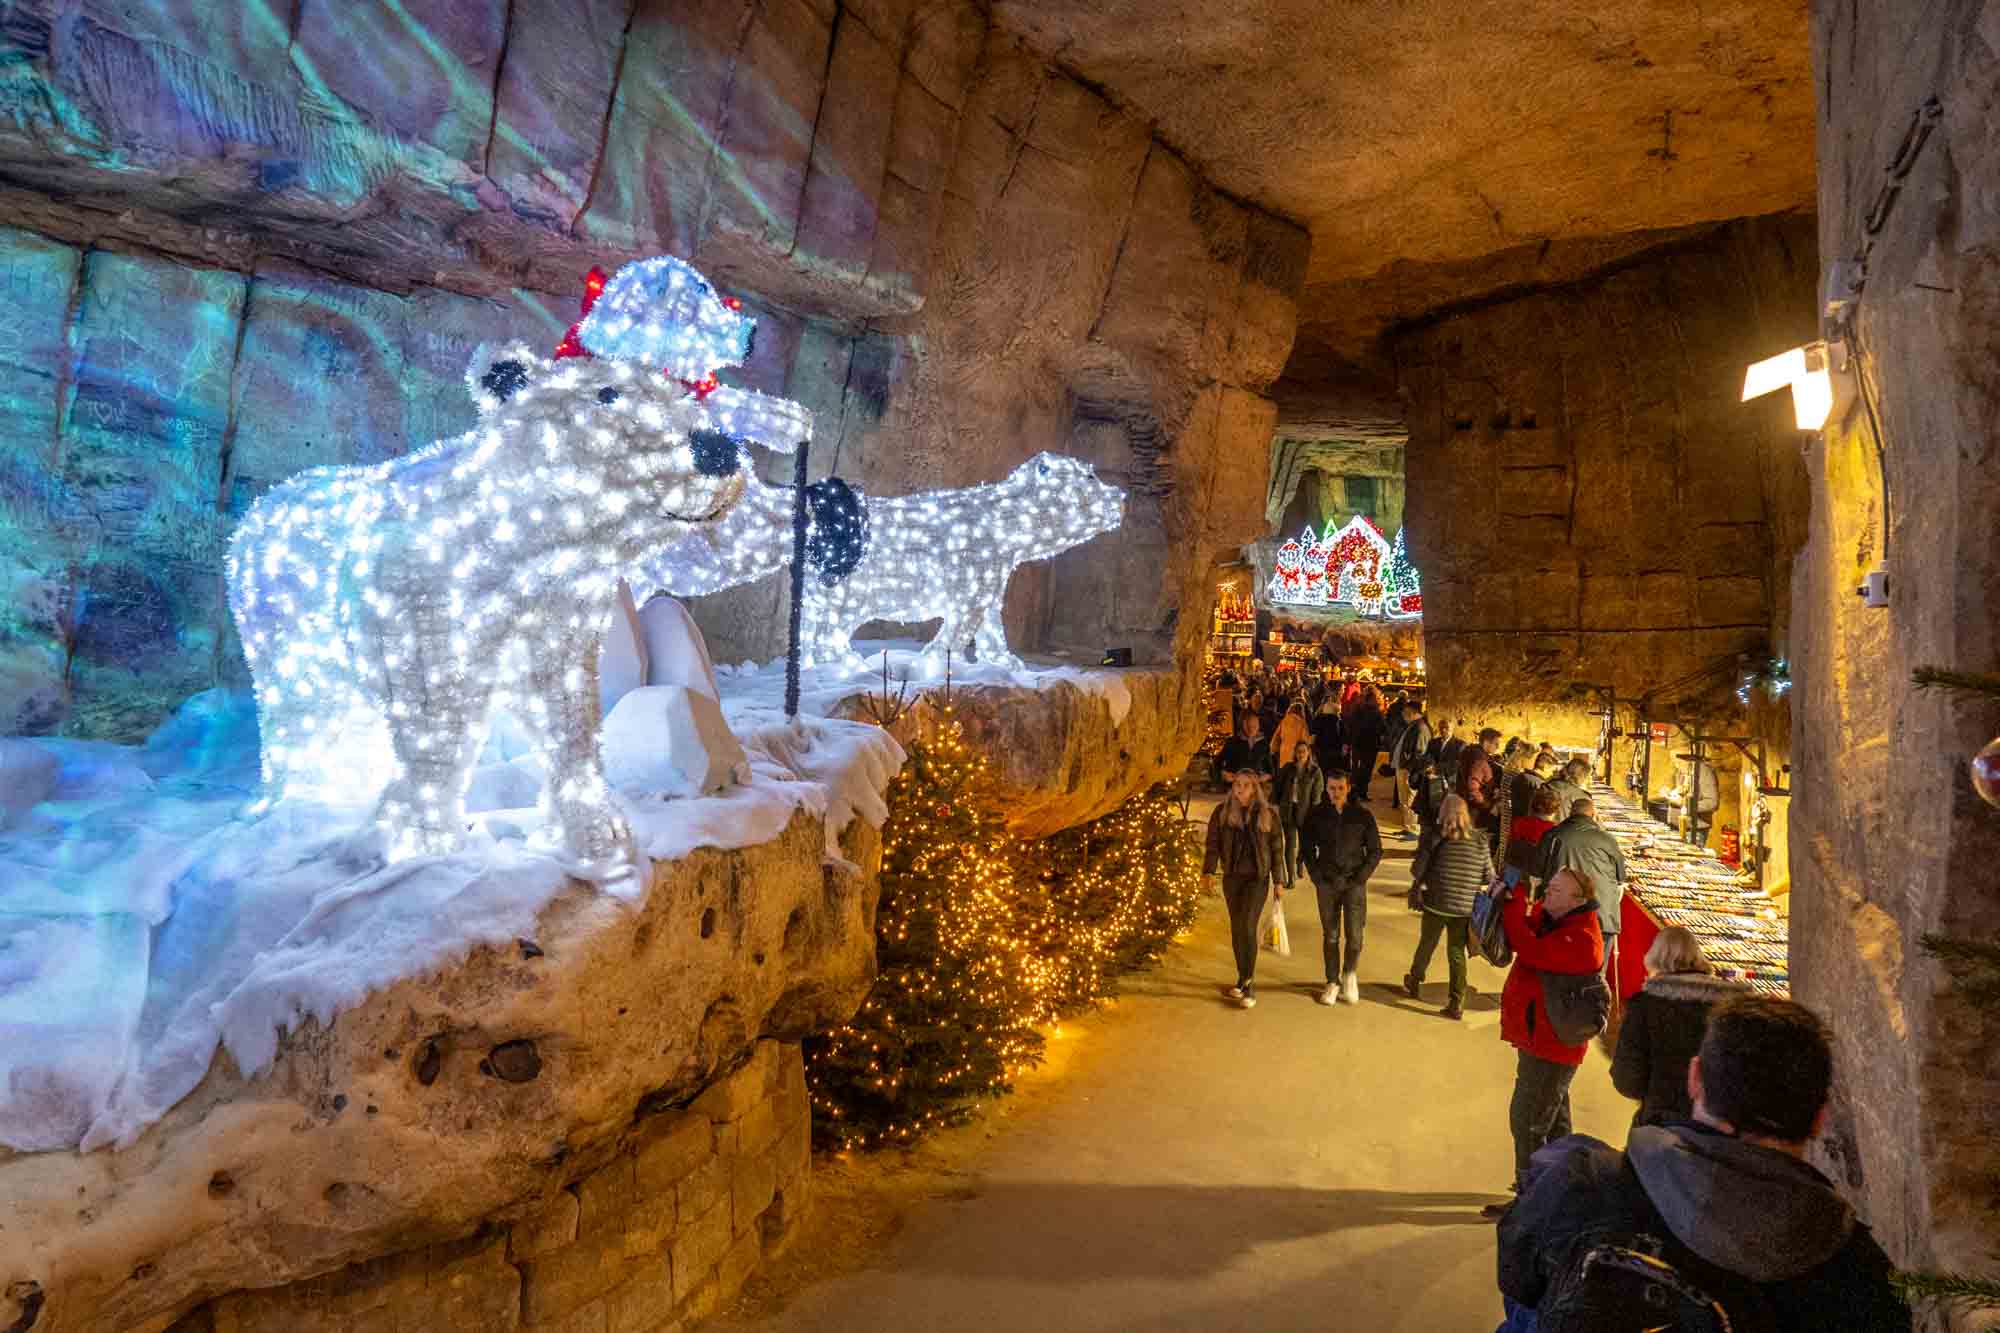 Christmas market shoppers in a cave decorated with light sculptures.